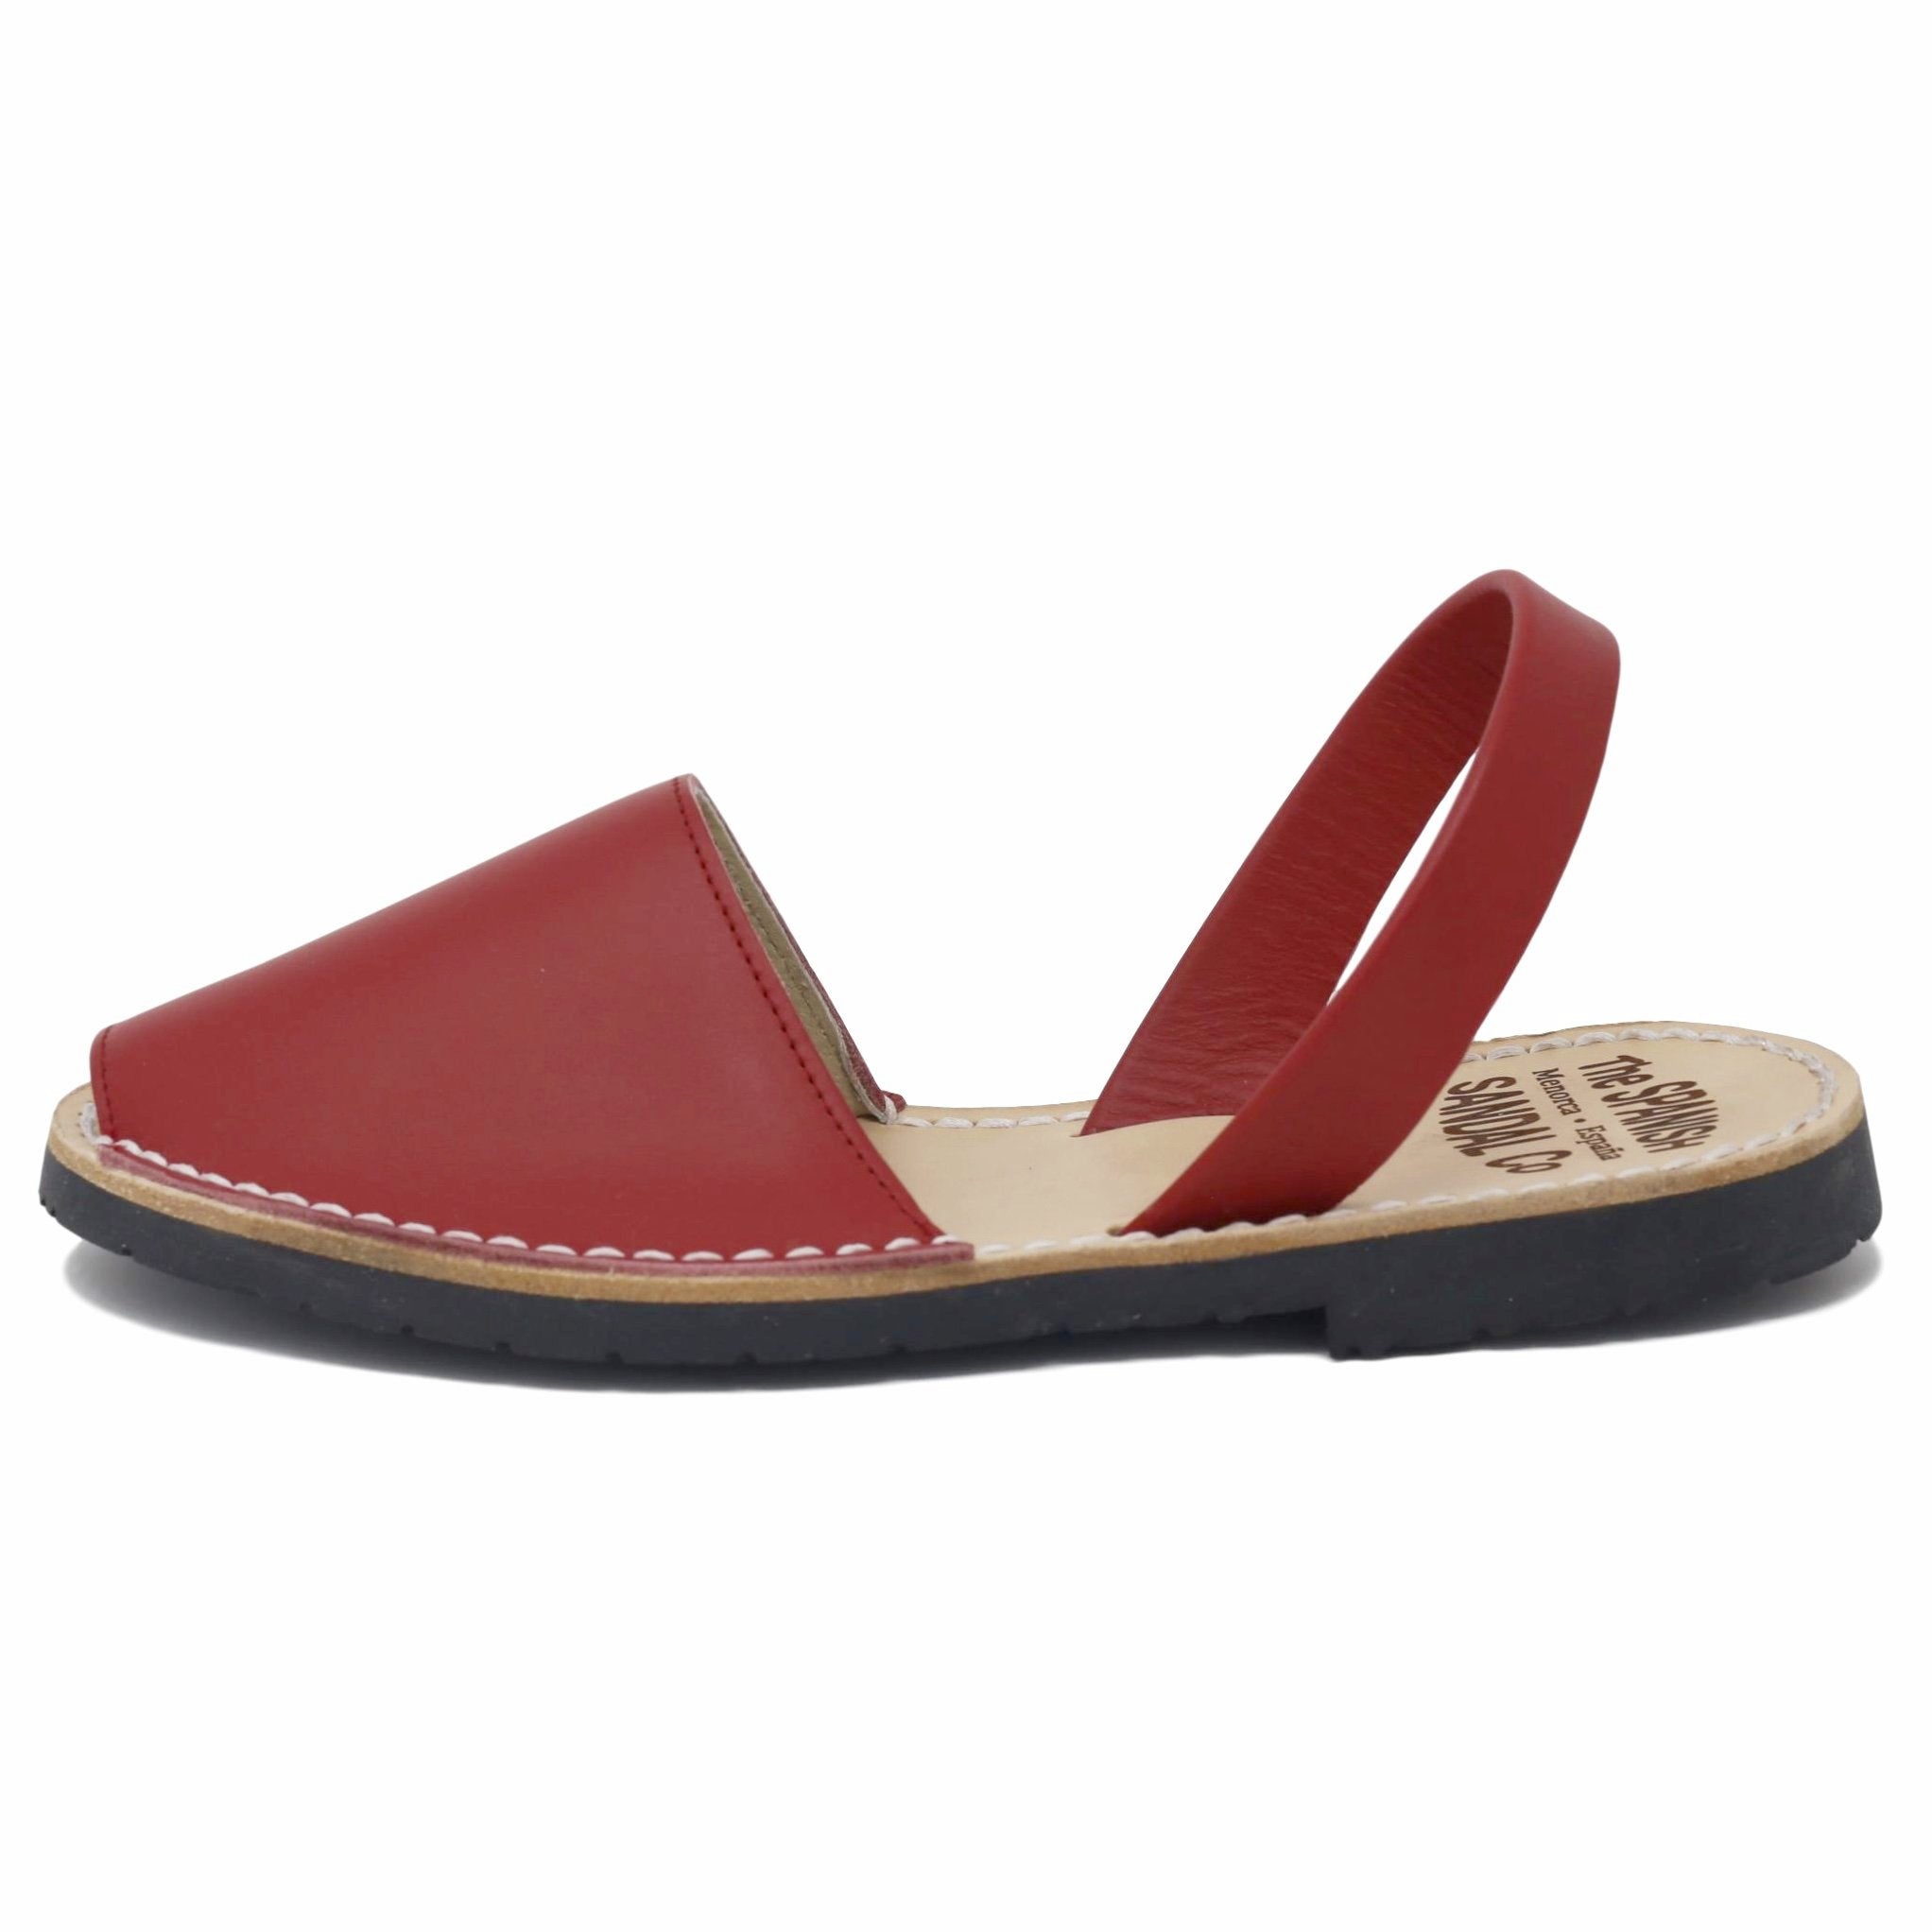 Classic red sandals  - side view